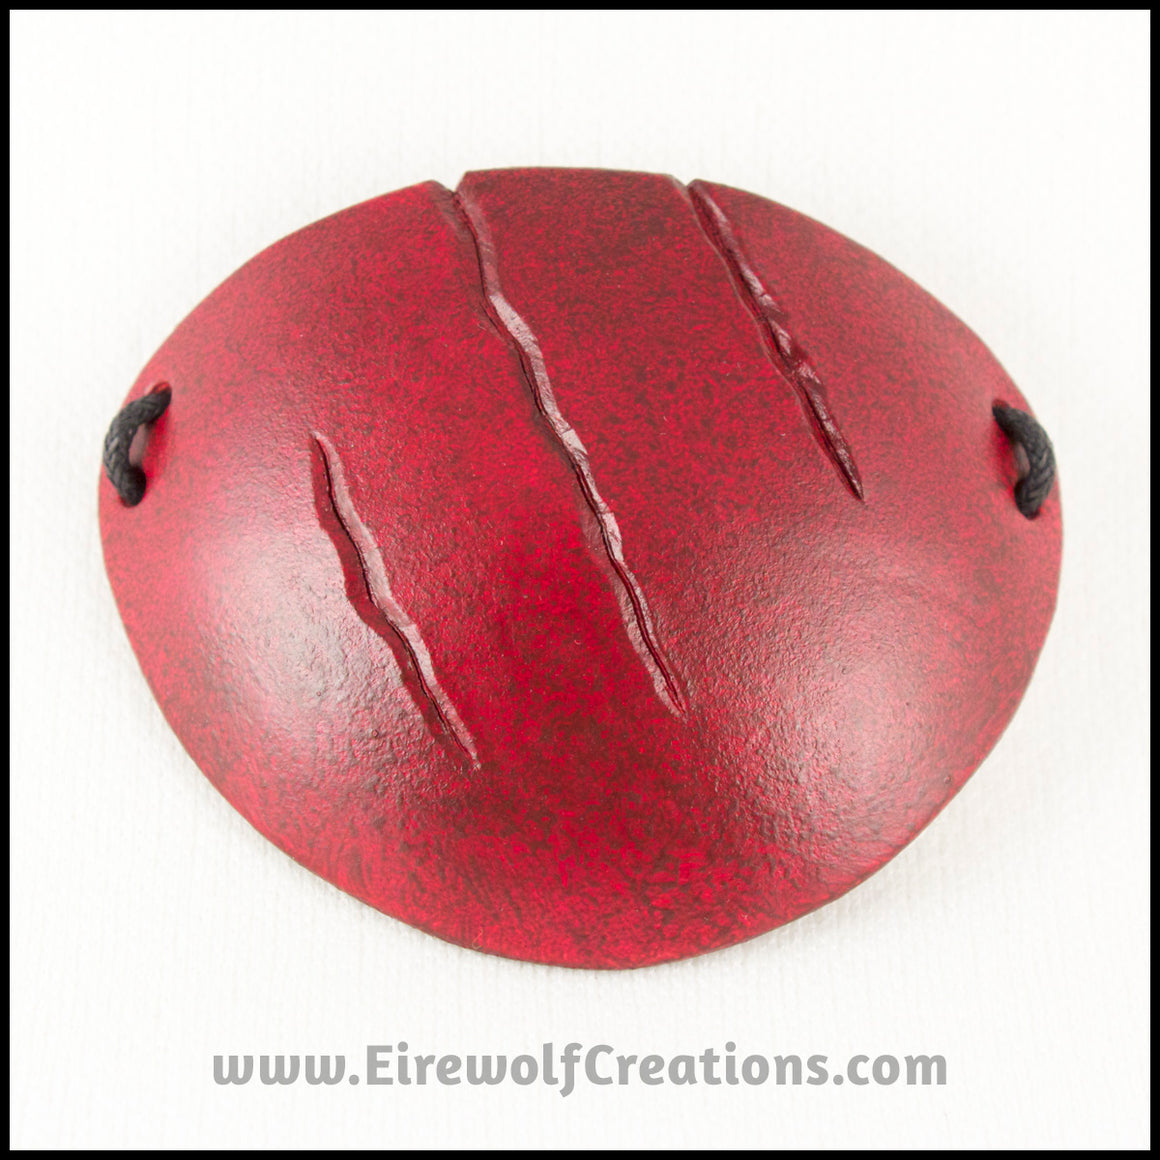 A handmade leather eye patch with three jagged scars carved diagonally, dyed and painted a mottled red reminiscent of blood, for a masquerade costume or assassin or pirate cosplay. By Erin Metcalf of Eirewolf Creations.